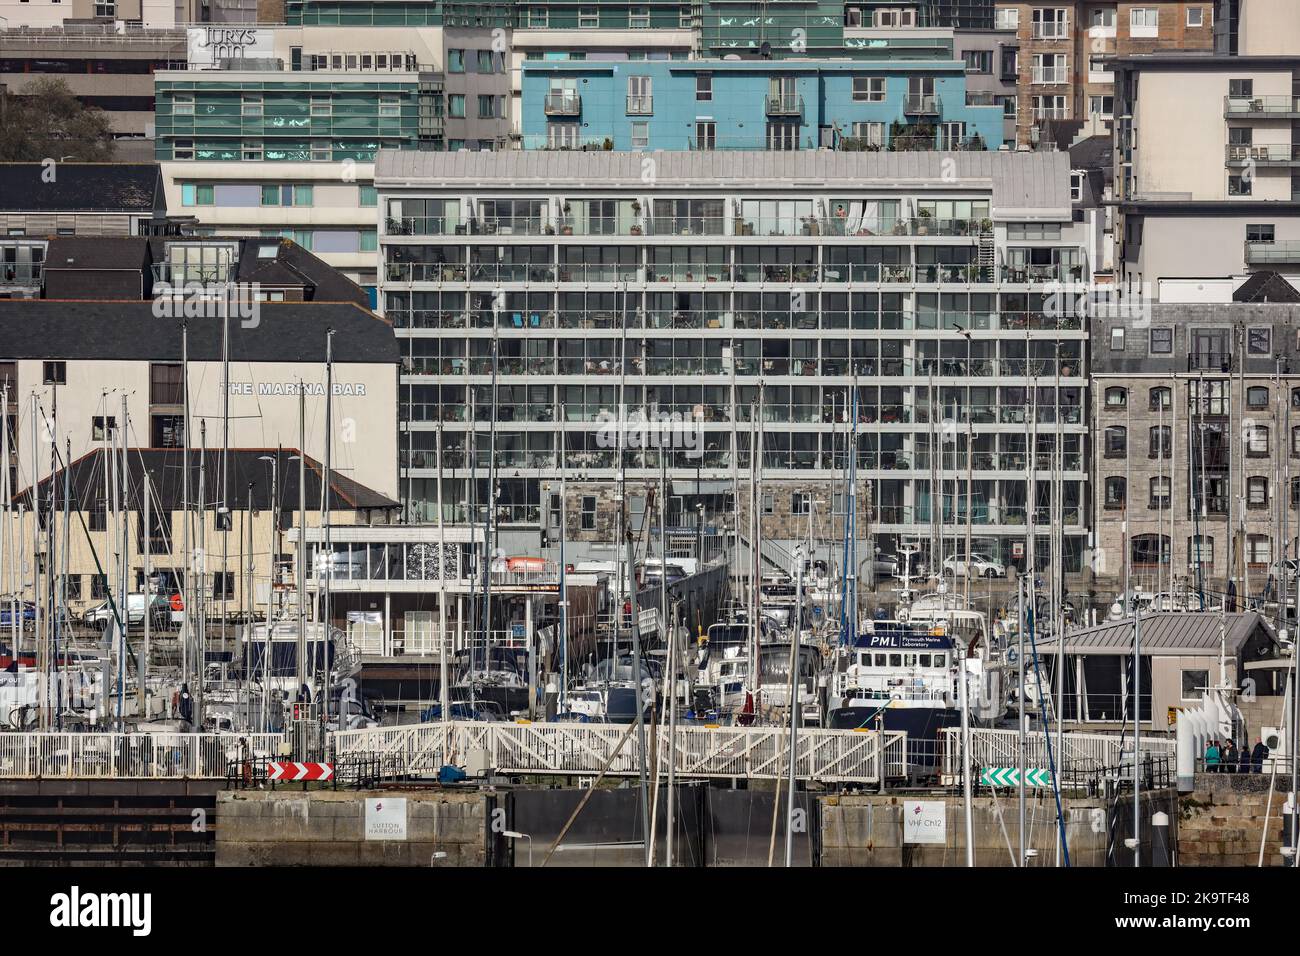 Boats and housing at Sutton Harbour Plymouth. A telephoto lens gives a very graphic image Stock Photo